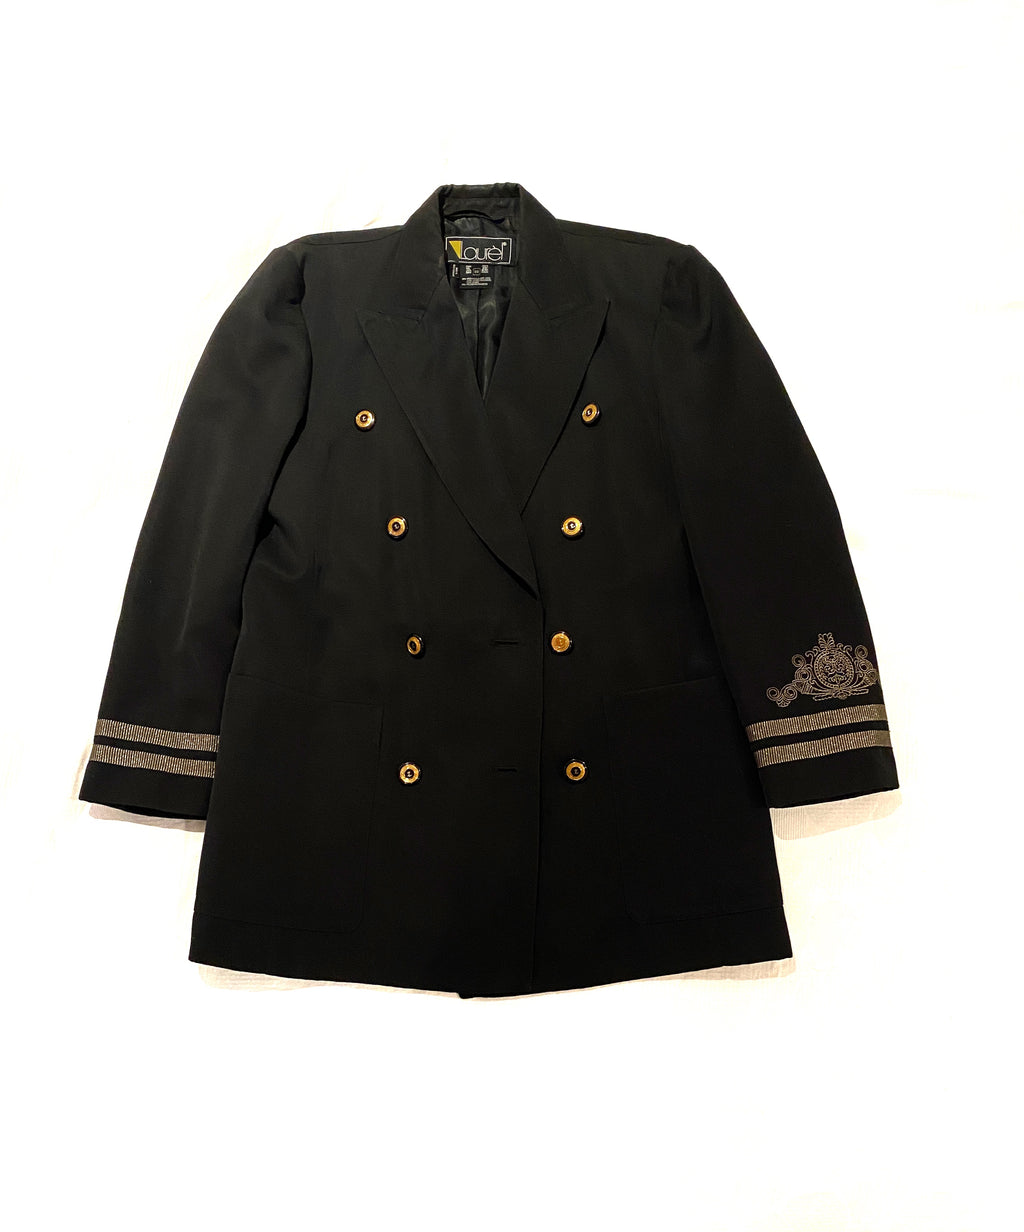 Laurel Escada jacket, vintage, black with gold buttons, military style